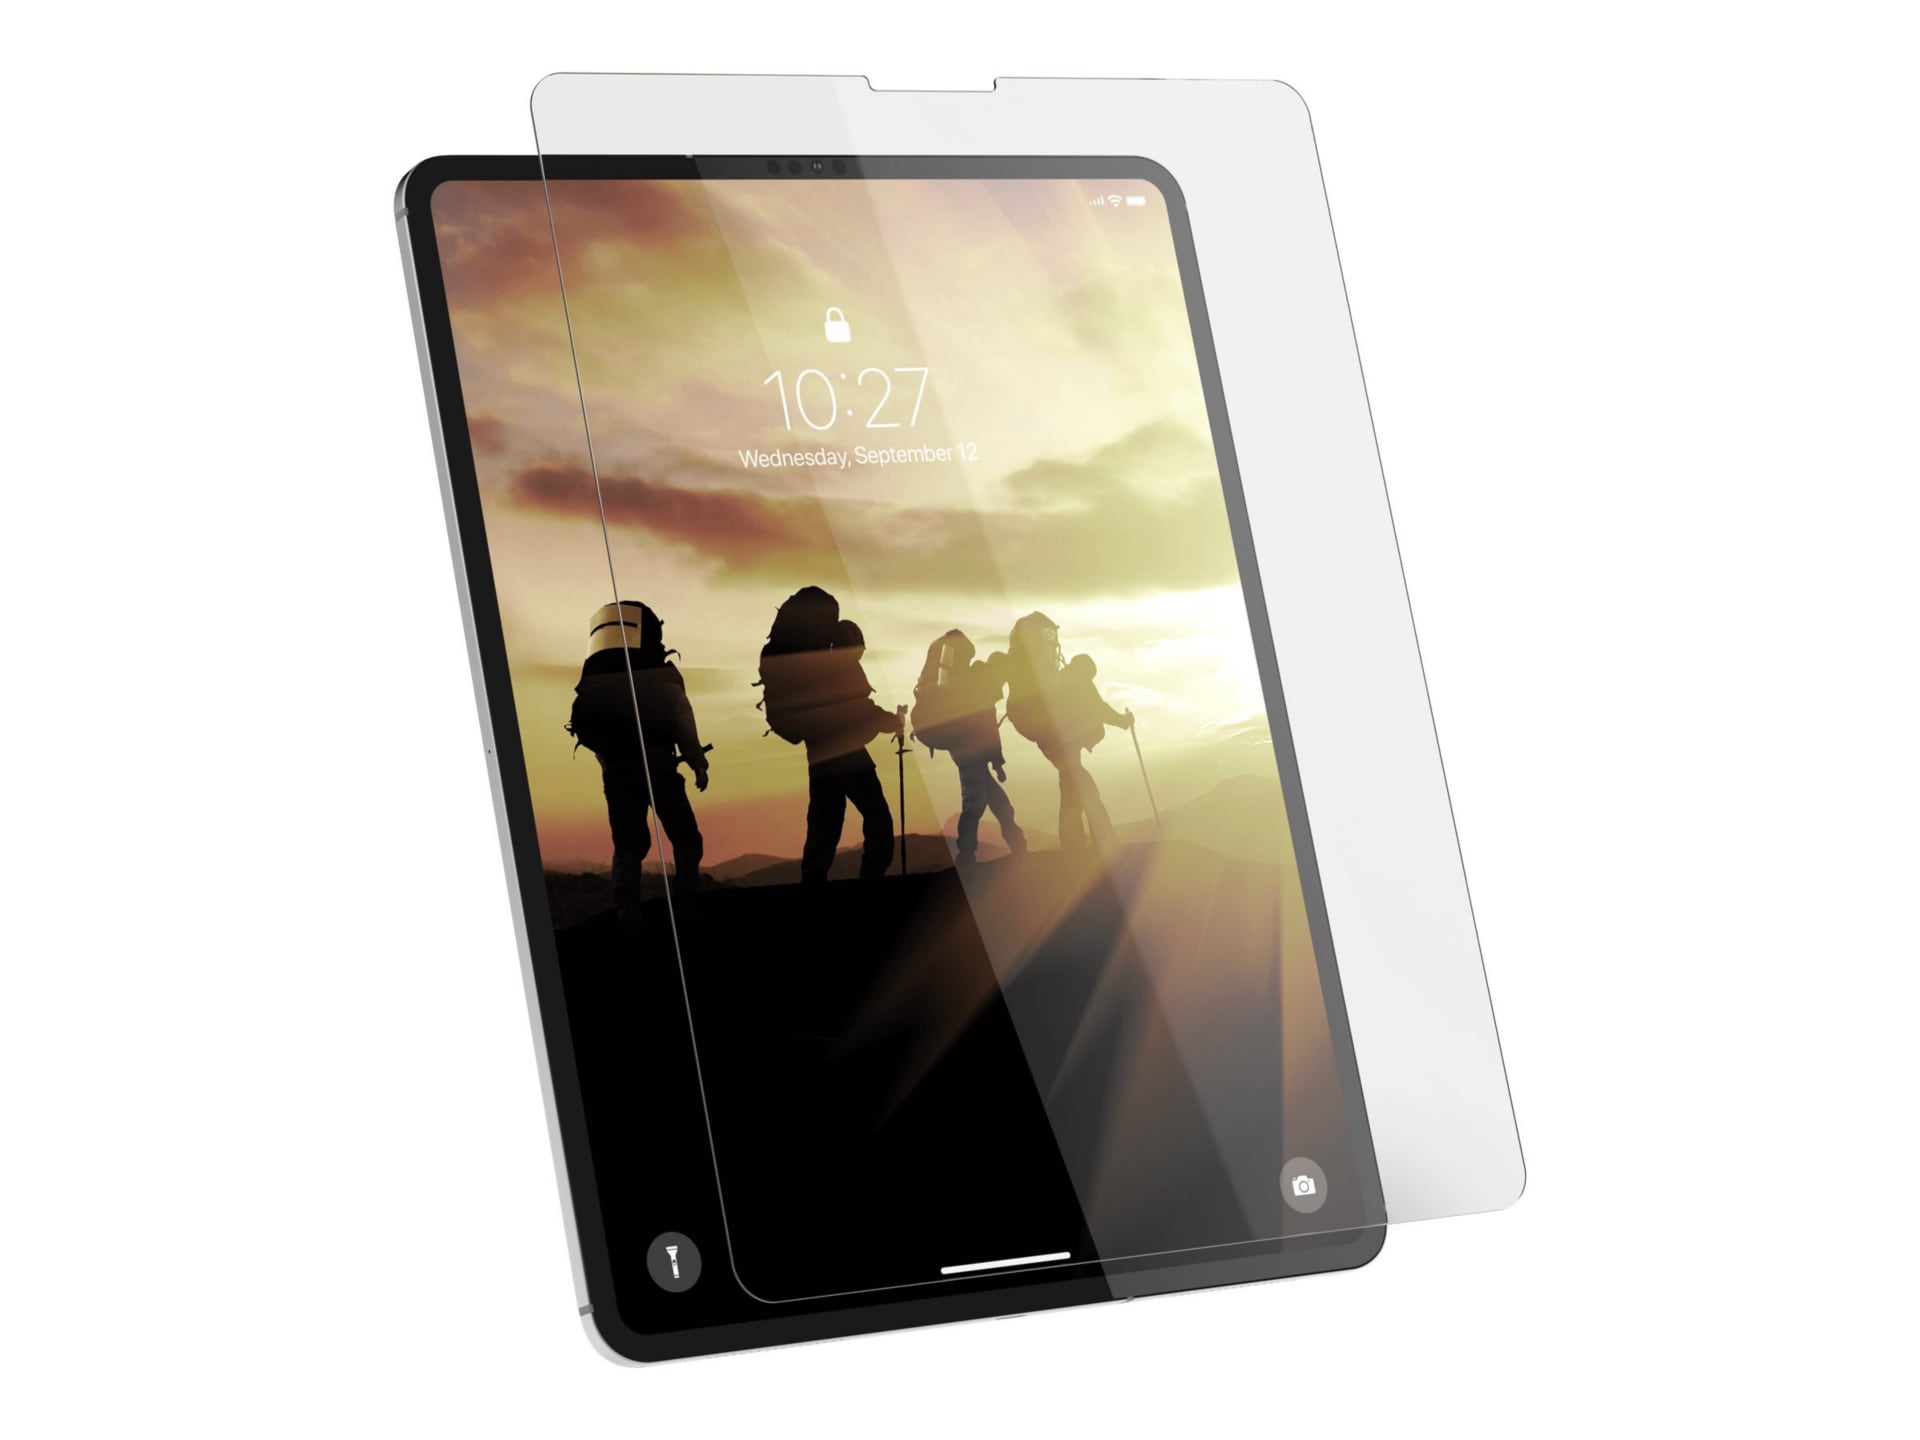 UAG Tempered Glass Screen Shield for iPad Pro 12.9-inch (Gen 5/4/3, 2021,2020,2018 - screen protector for tablet